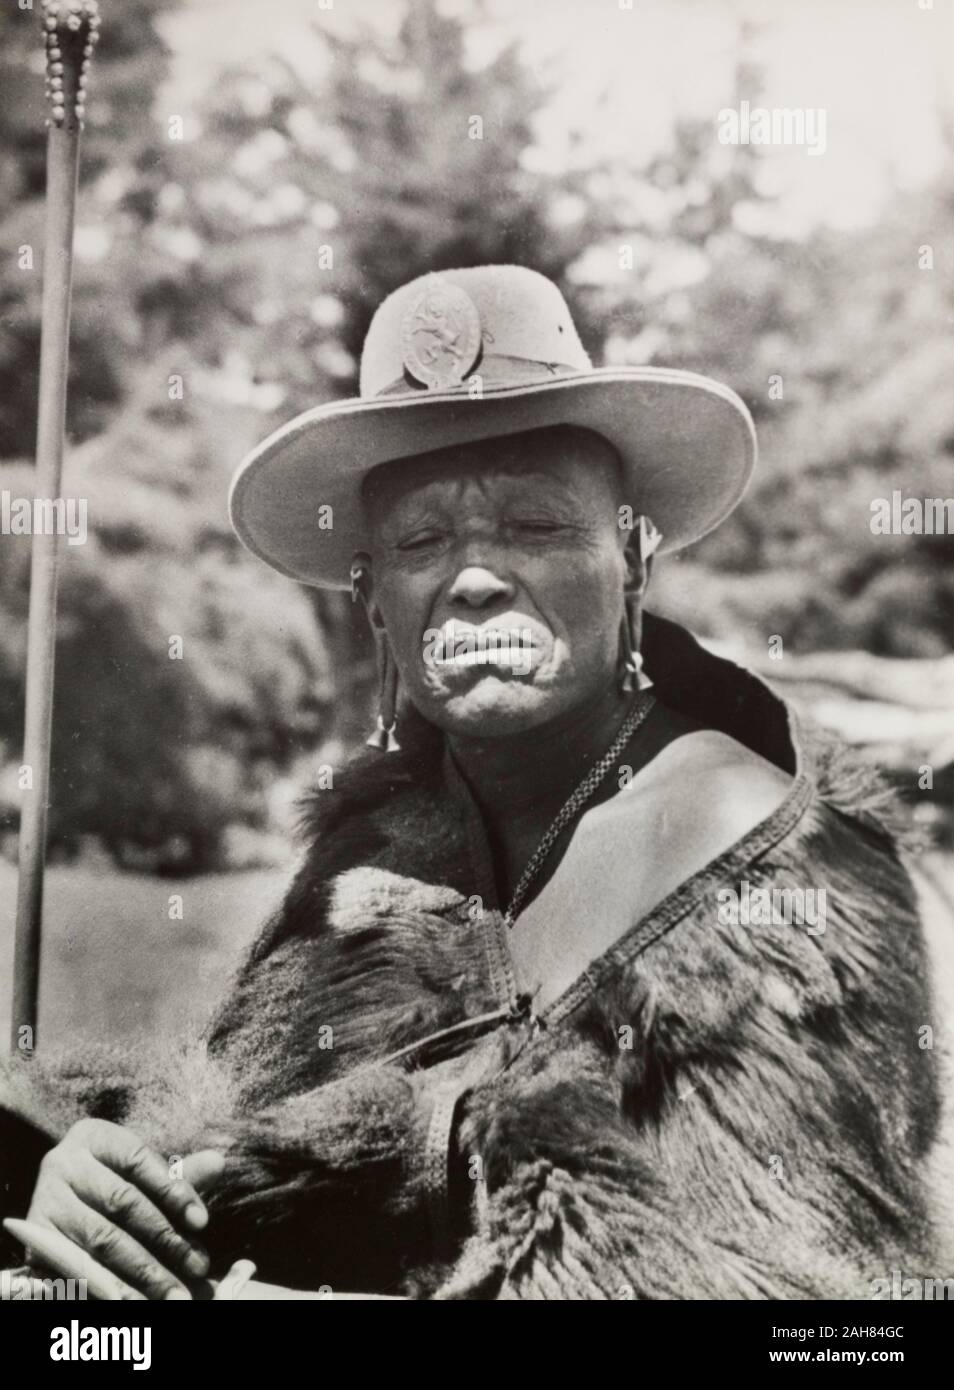 Kenya, Portrait of Chief Murigo wearing traditional Kikuyu jewellery and holding a staff. He wears a Western-style, wide-brimmed hat with a badge depicting a lion, and an animal skin wrapped around his shoulders. Original manuscript caption: Chief Murigo. Near Kakamega, 1936(Kikuyu chapter) (Chap 13)98. p37, 1937. 1995/076/1/2/5/3. Stock Photo